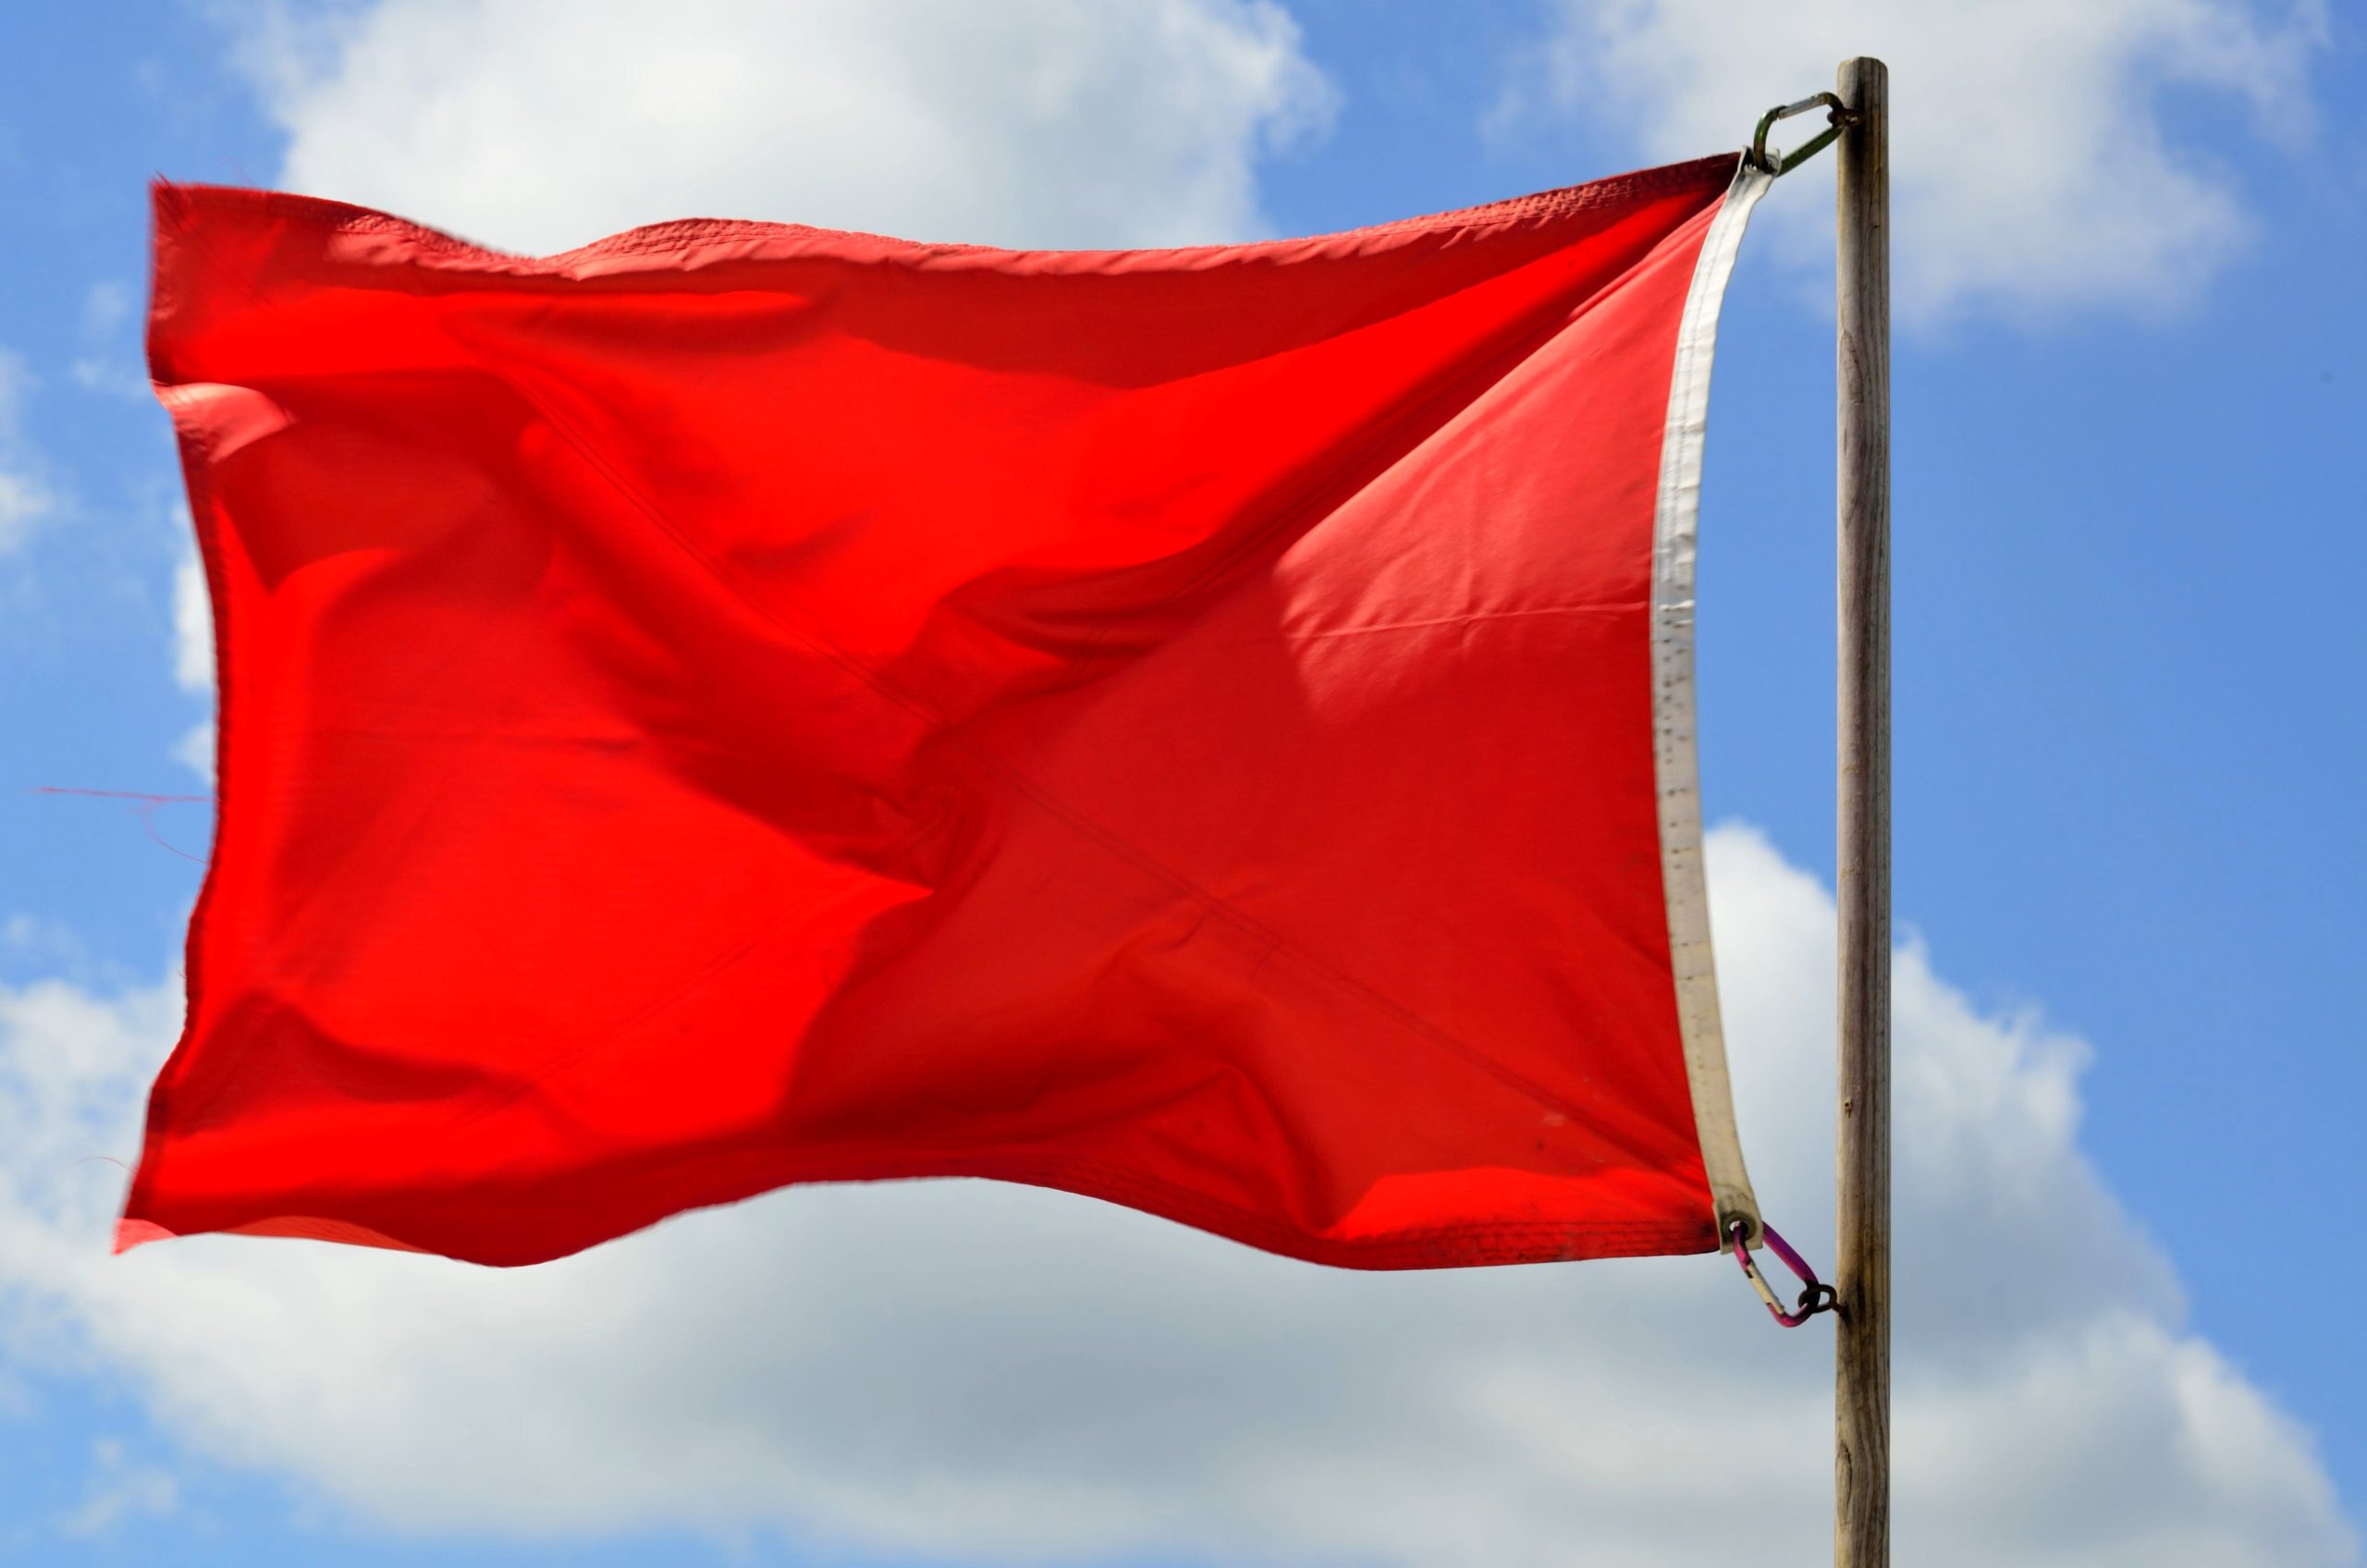 The Red Flags Of Real Estate - Dear Monty